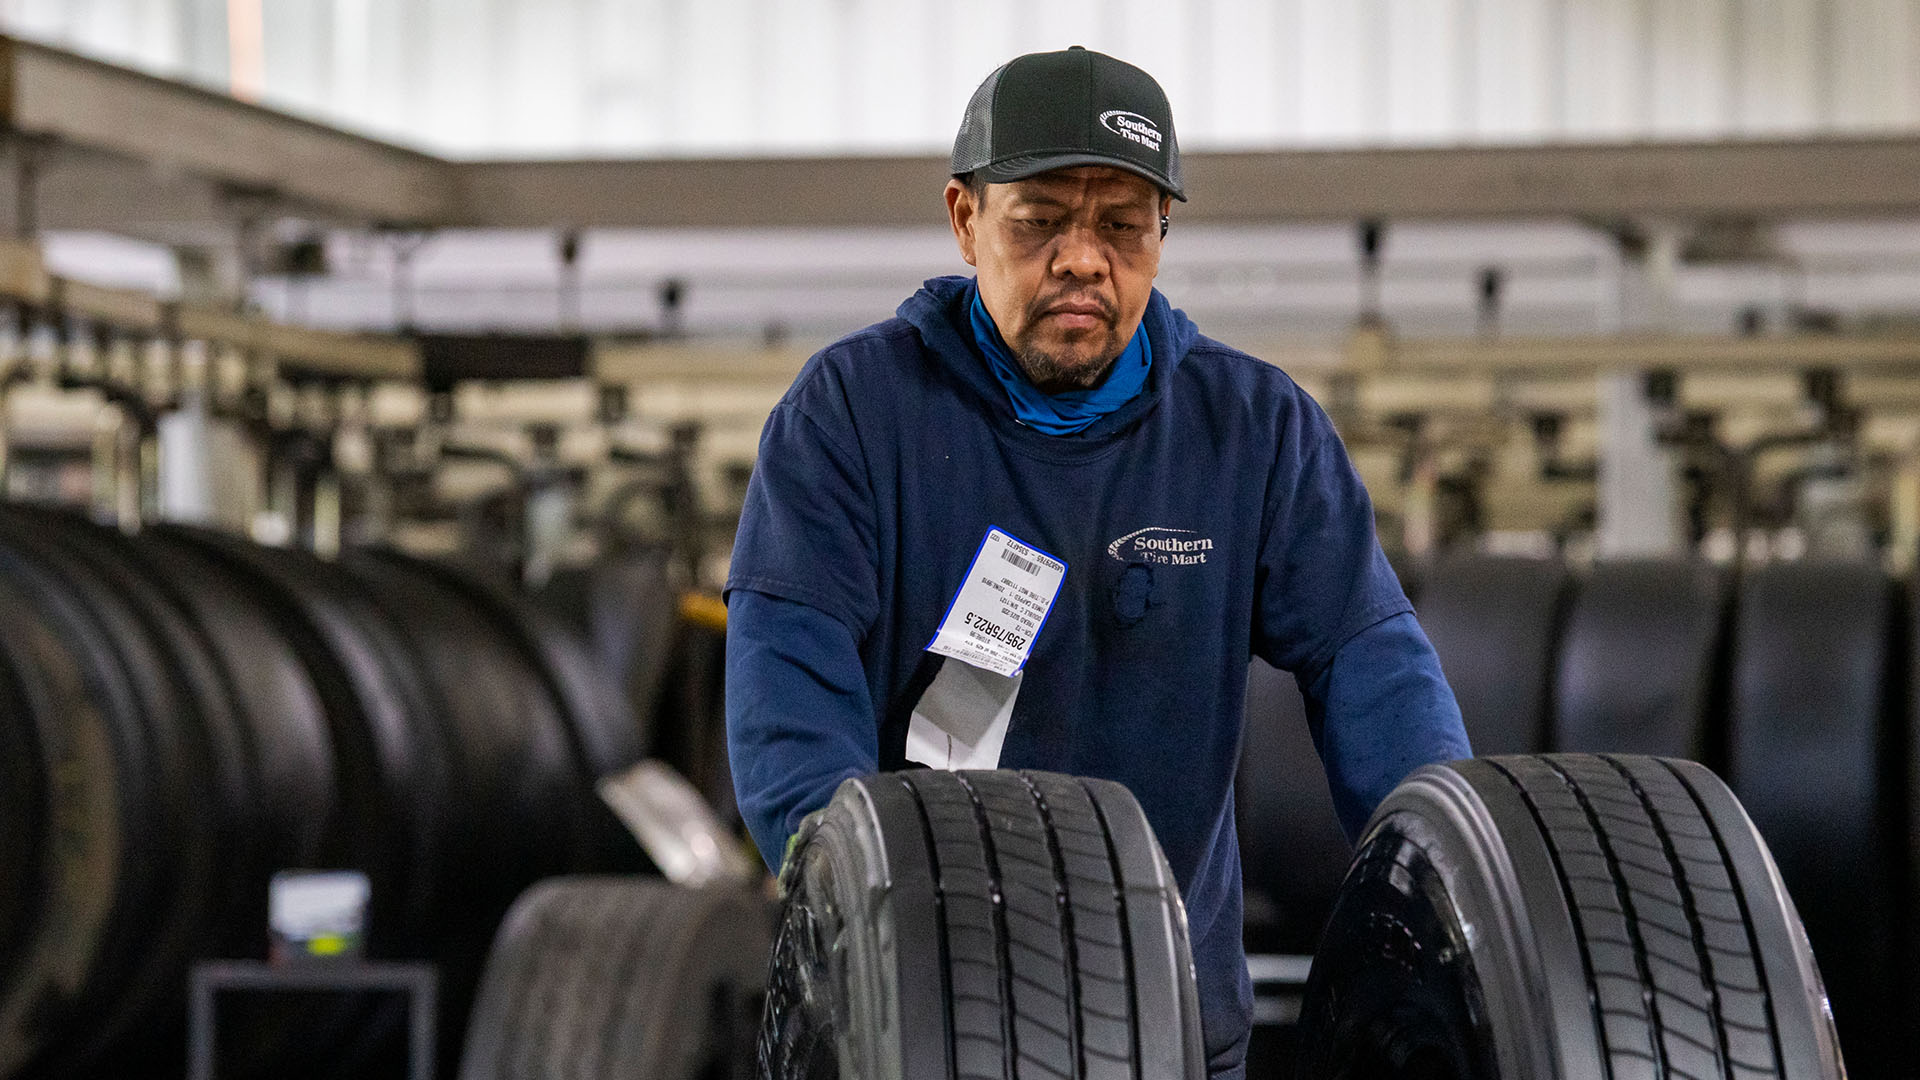 Hard working associate looking at tires